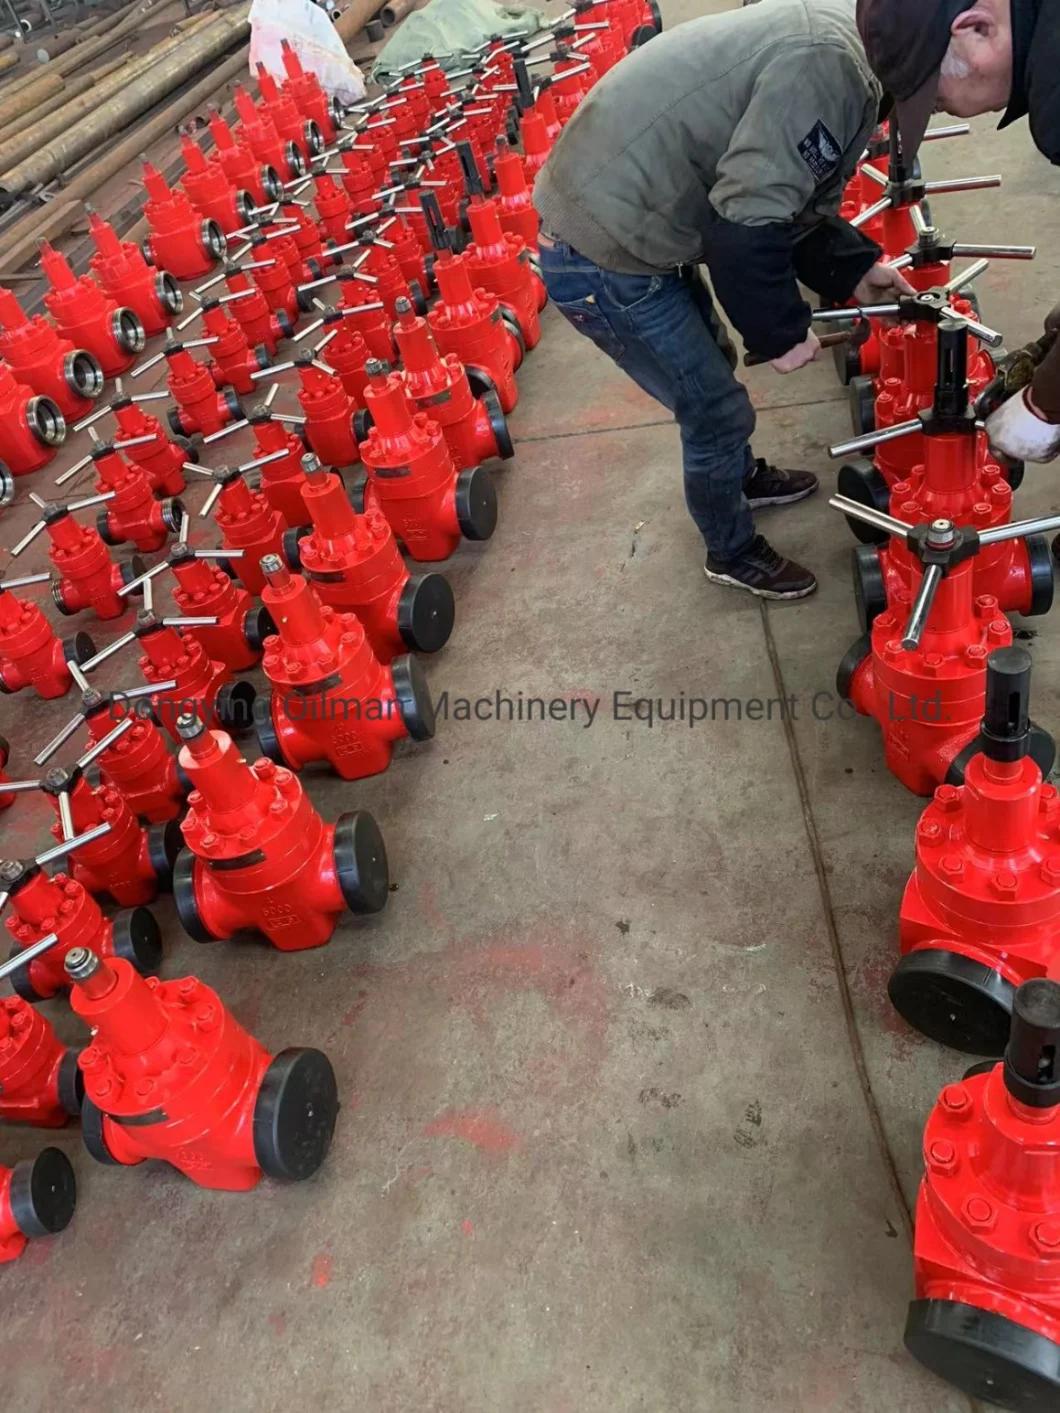 2in 3in 4in 5000psi 10000psi API 6A Mud Gate Valve for Manifolds and Pipeline